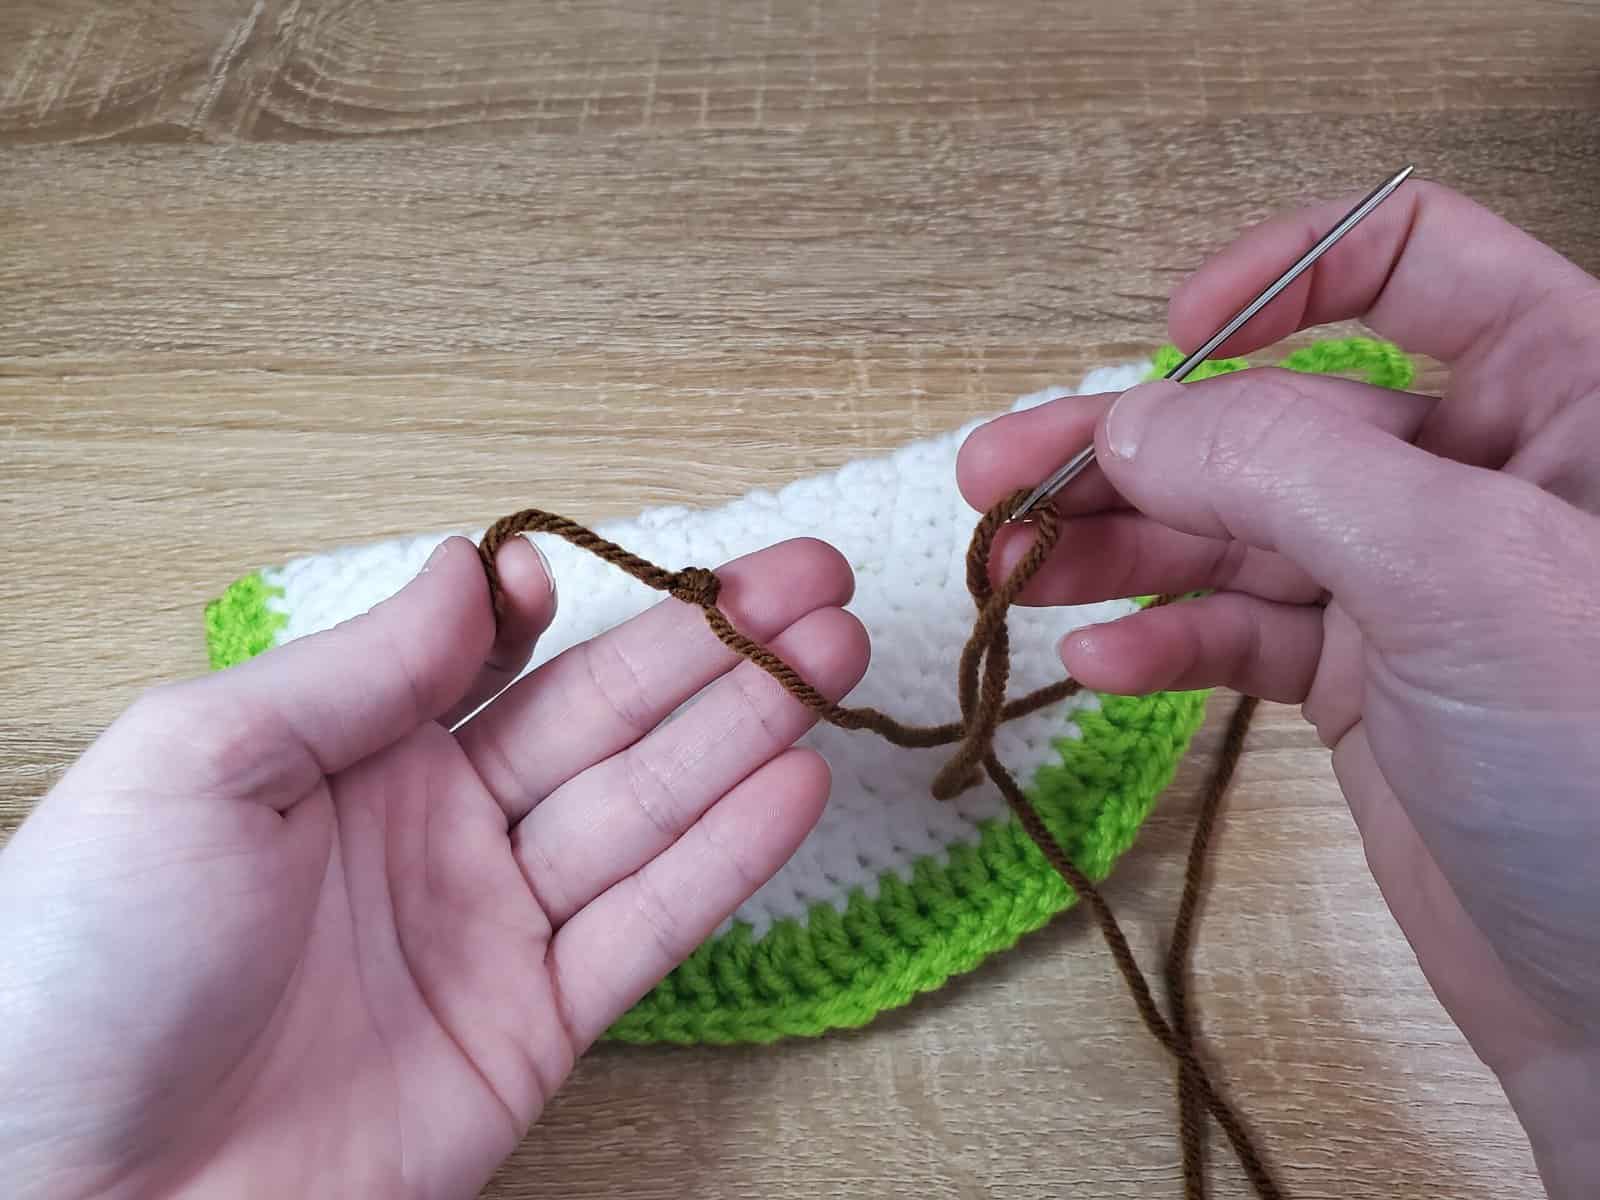 tying a knot at the end of the brown yarn